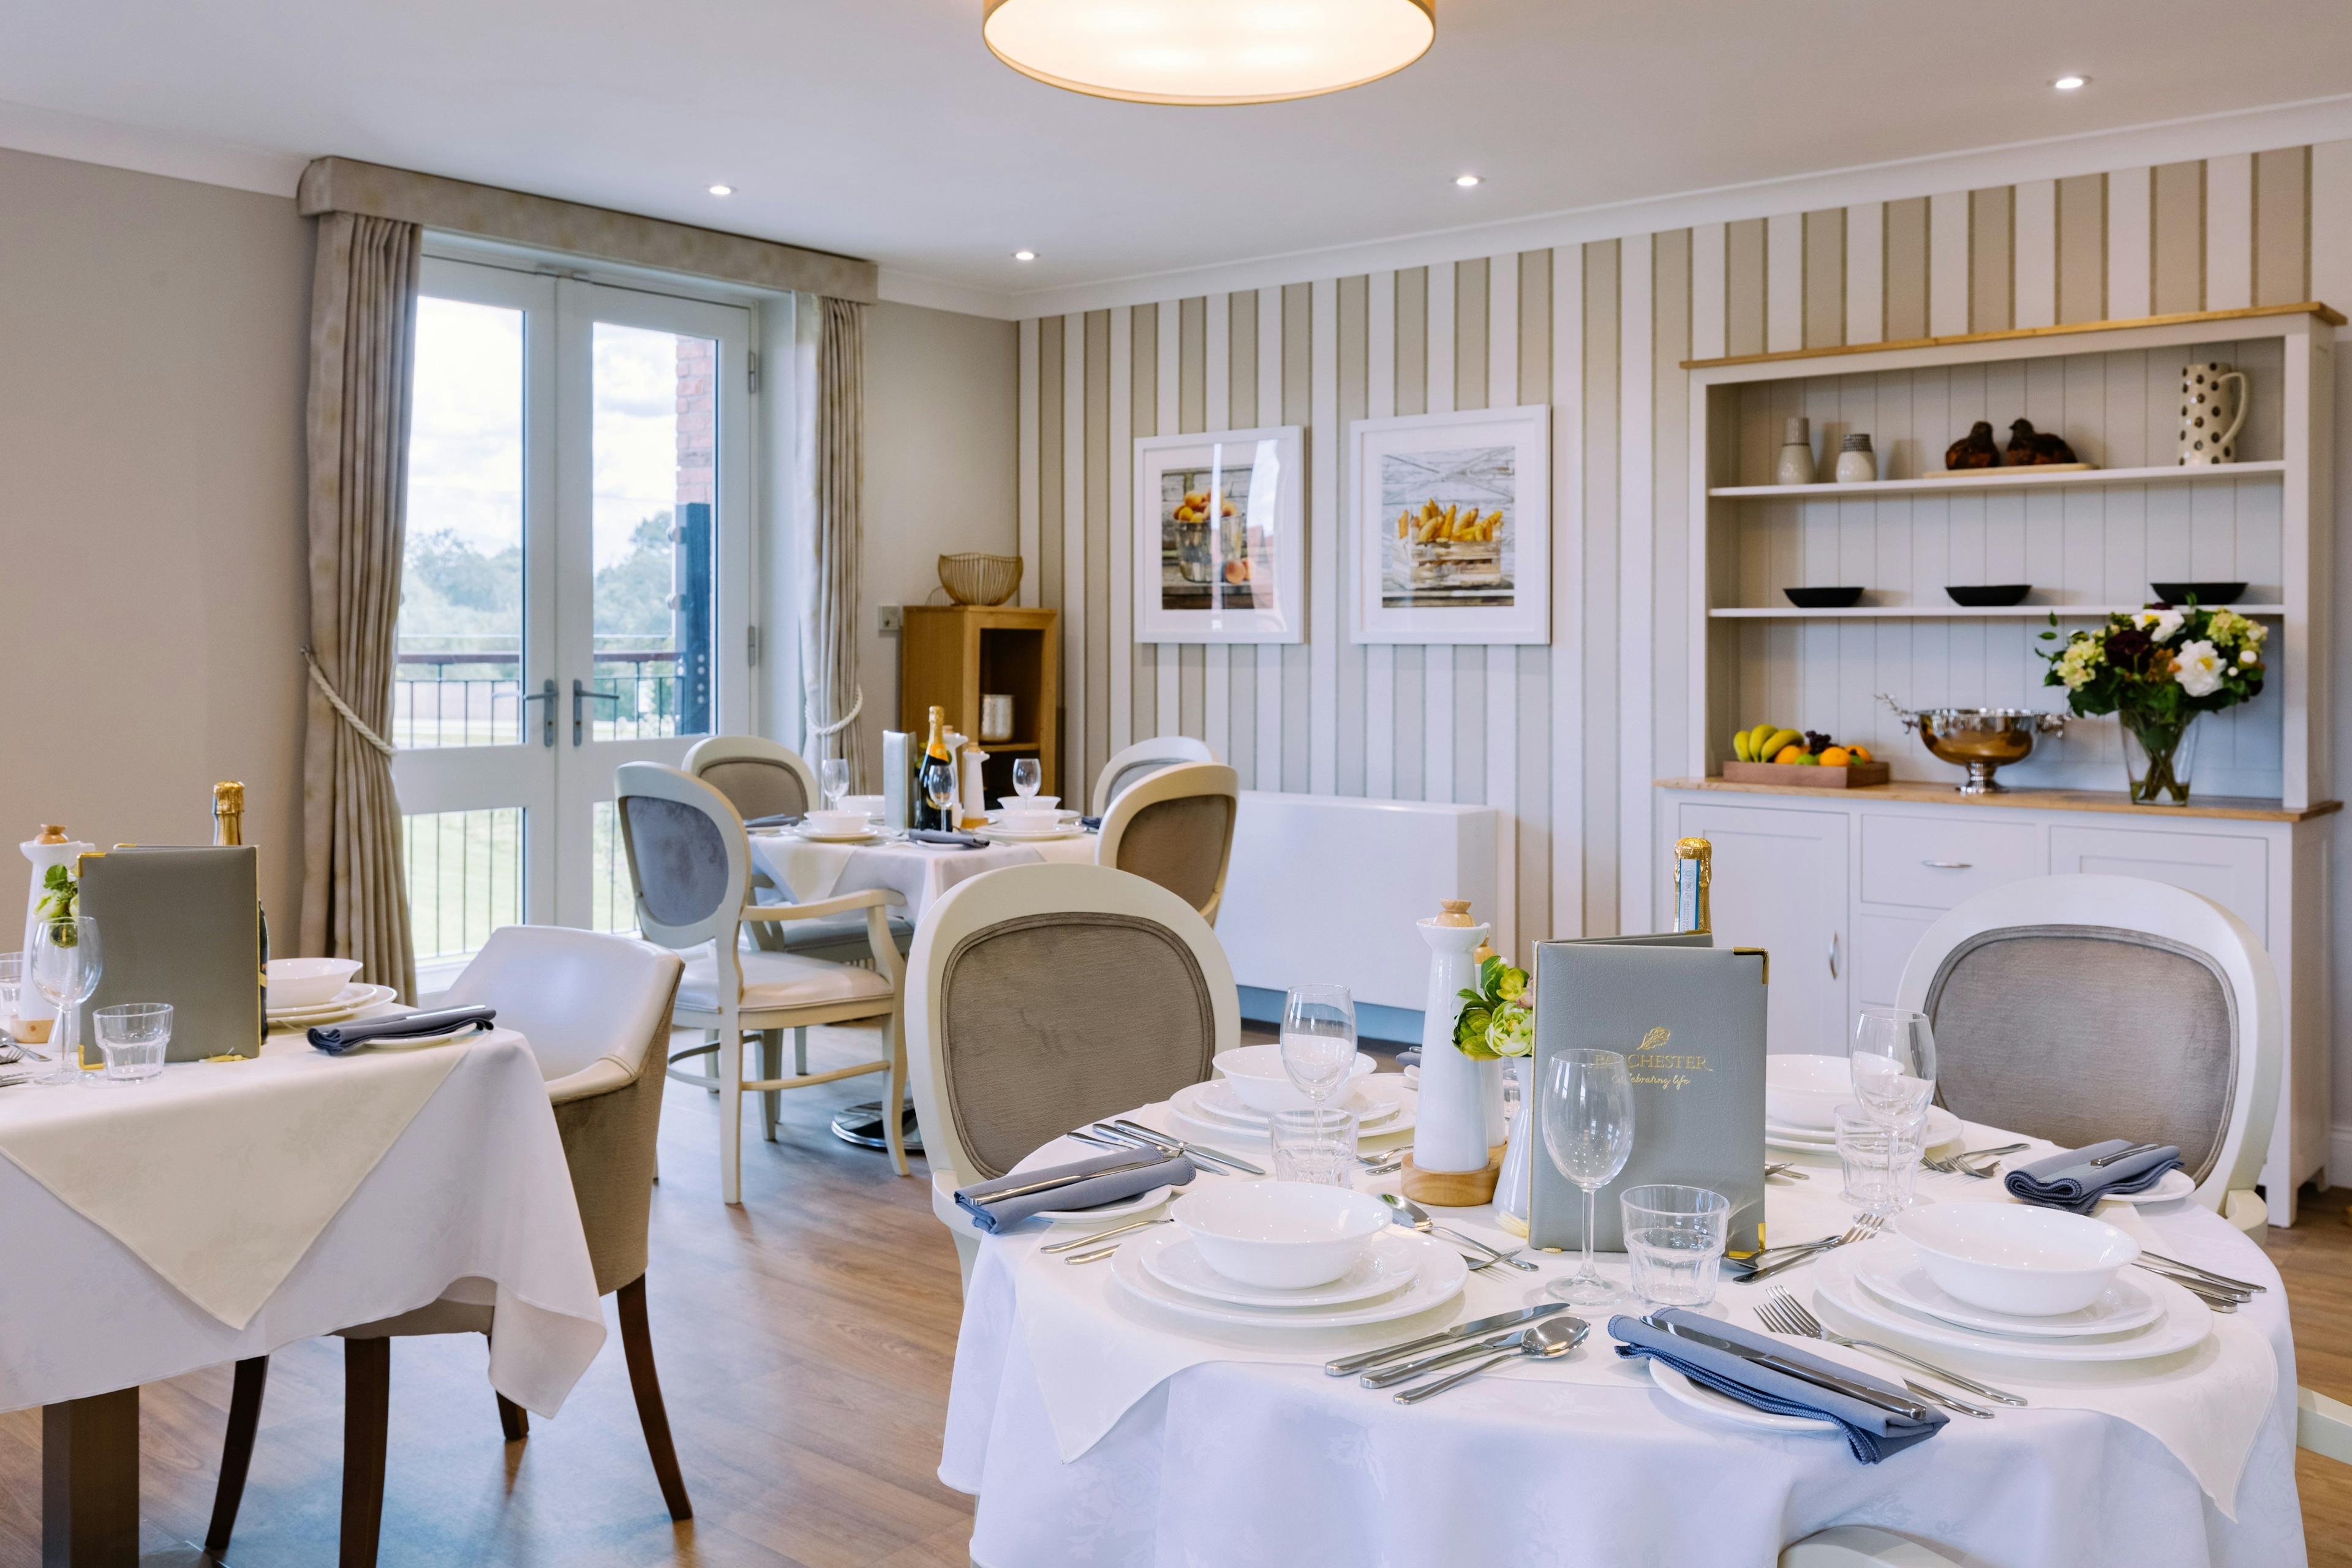 Dining Room at Ouse View Care Home in York, North Yorkshire